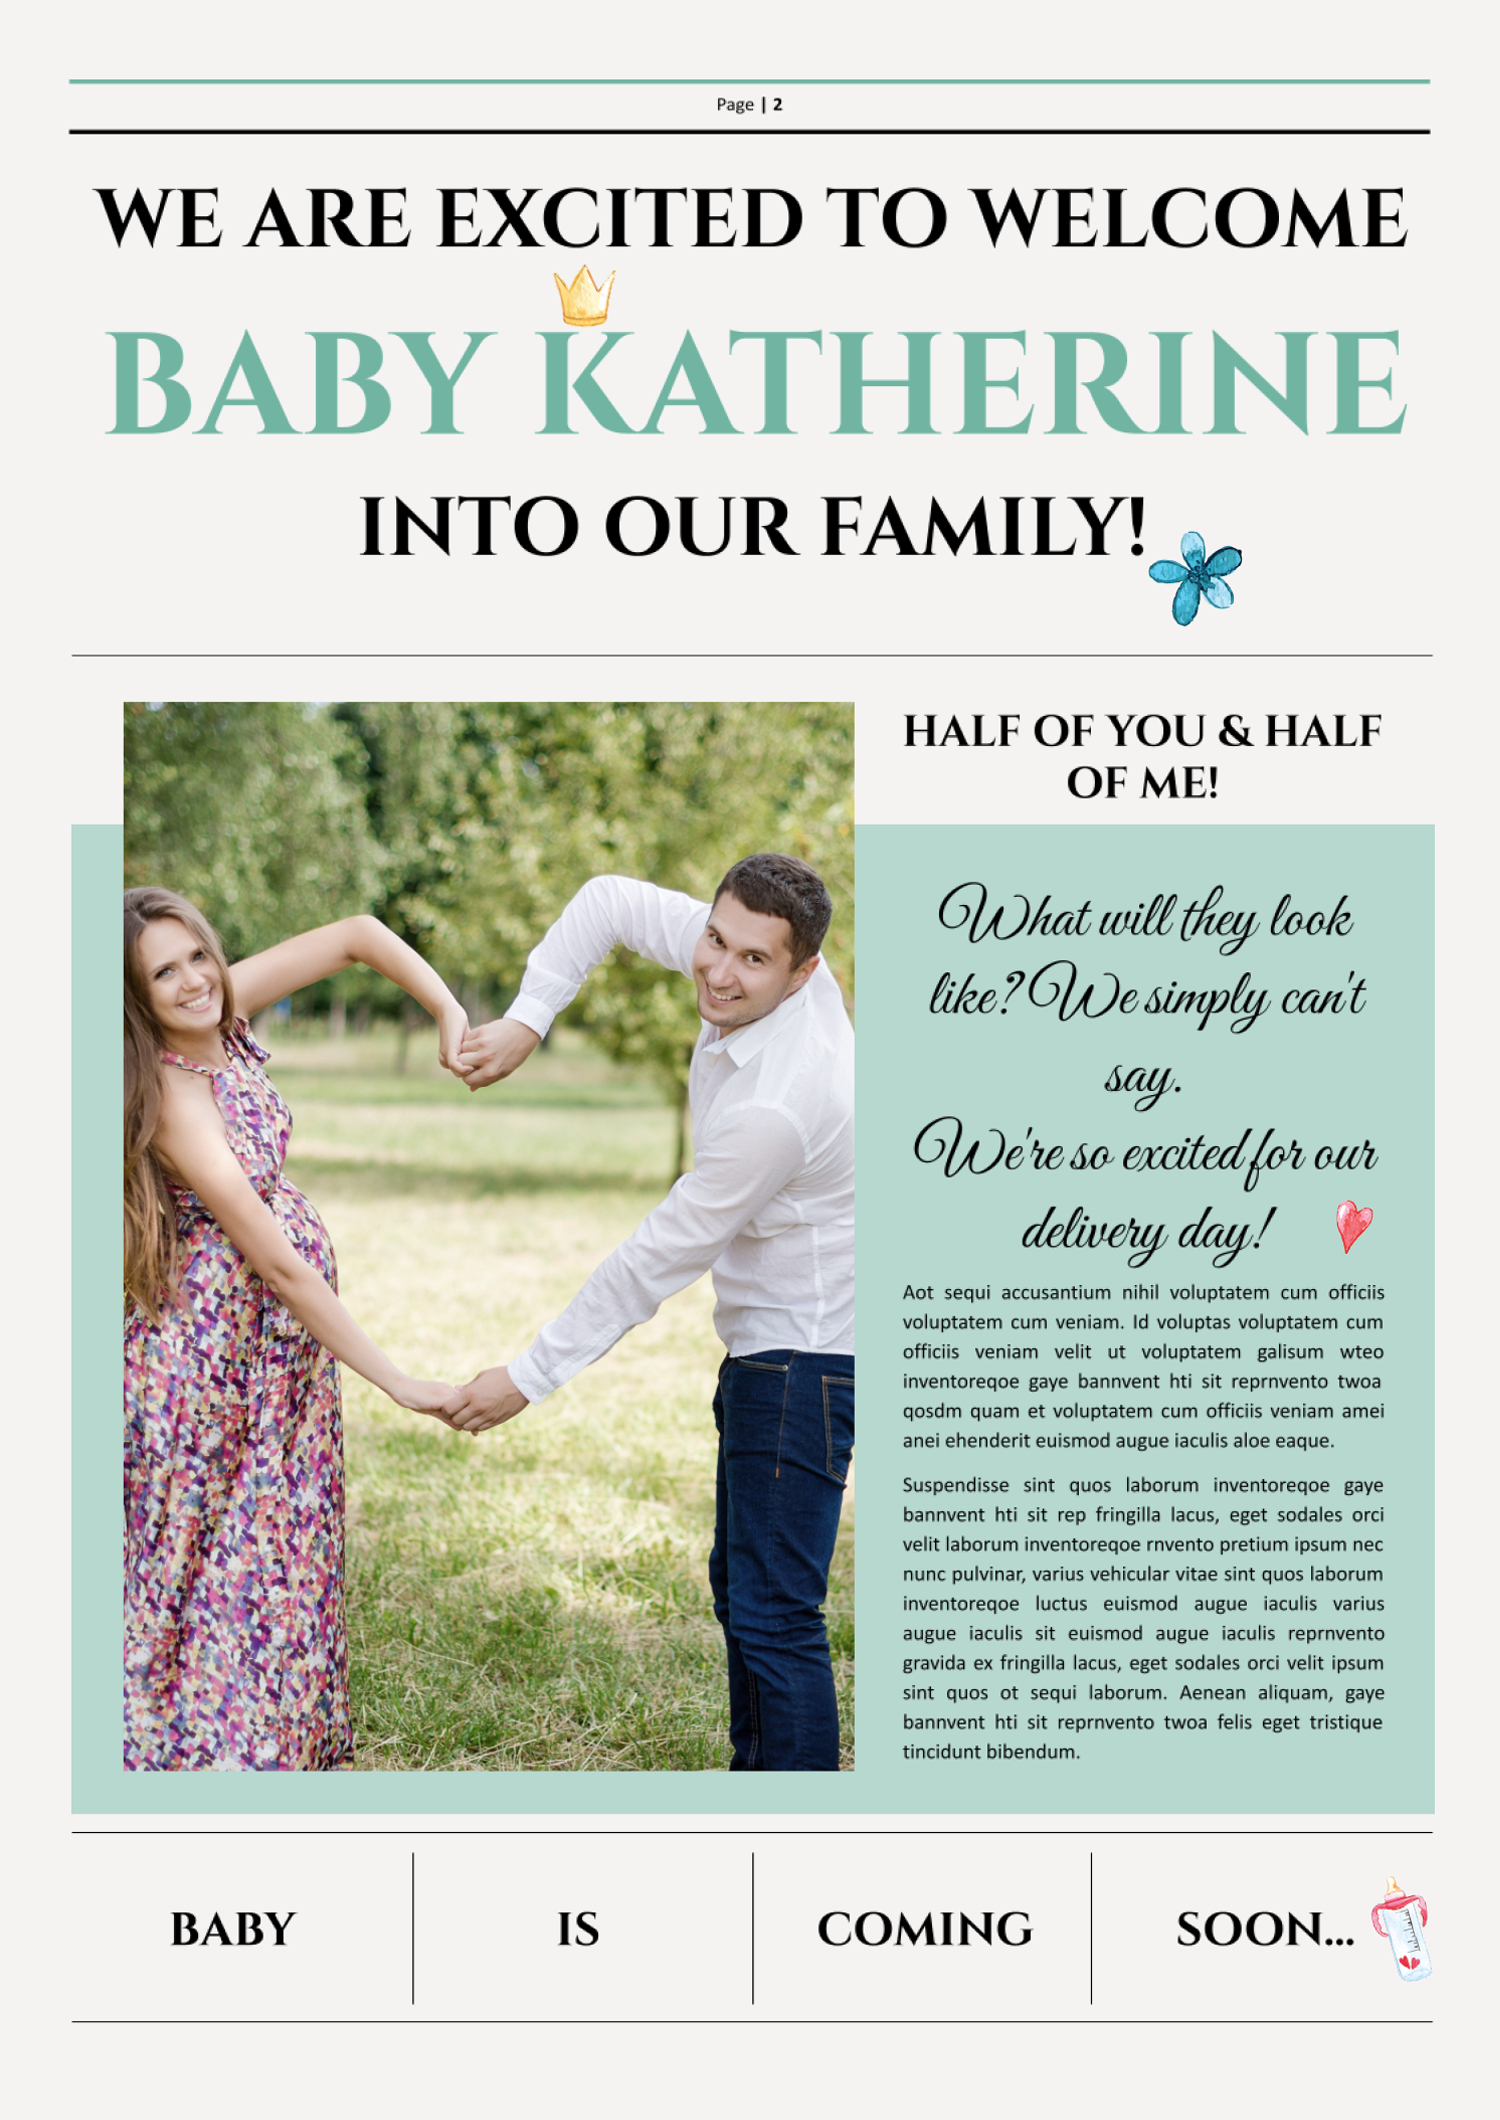 Classic Pregnancy Announcement Newspaper Template - Page 02